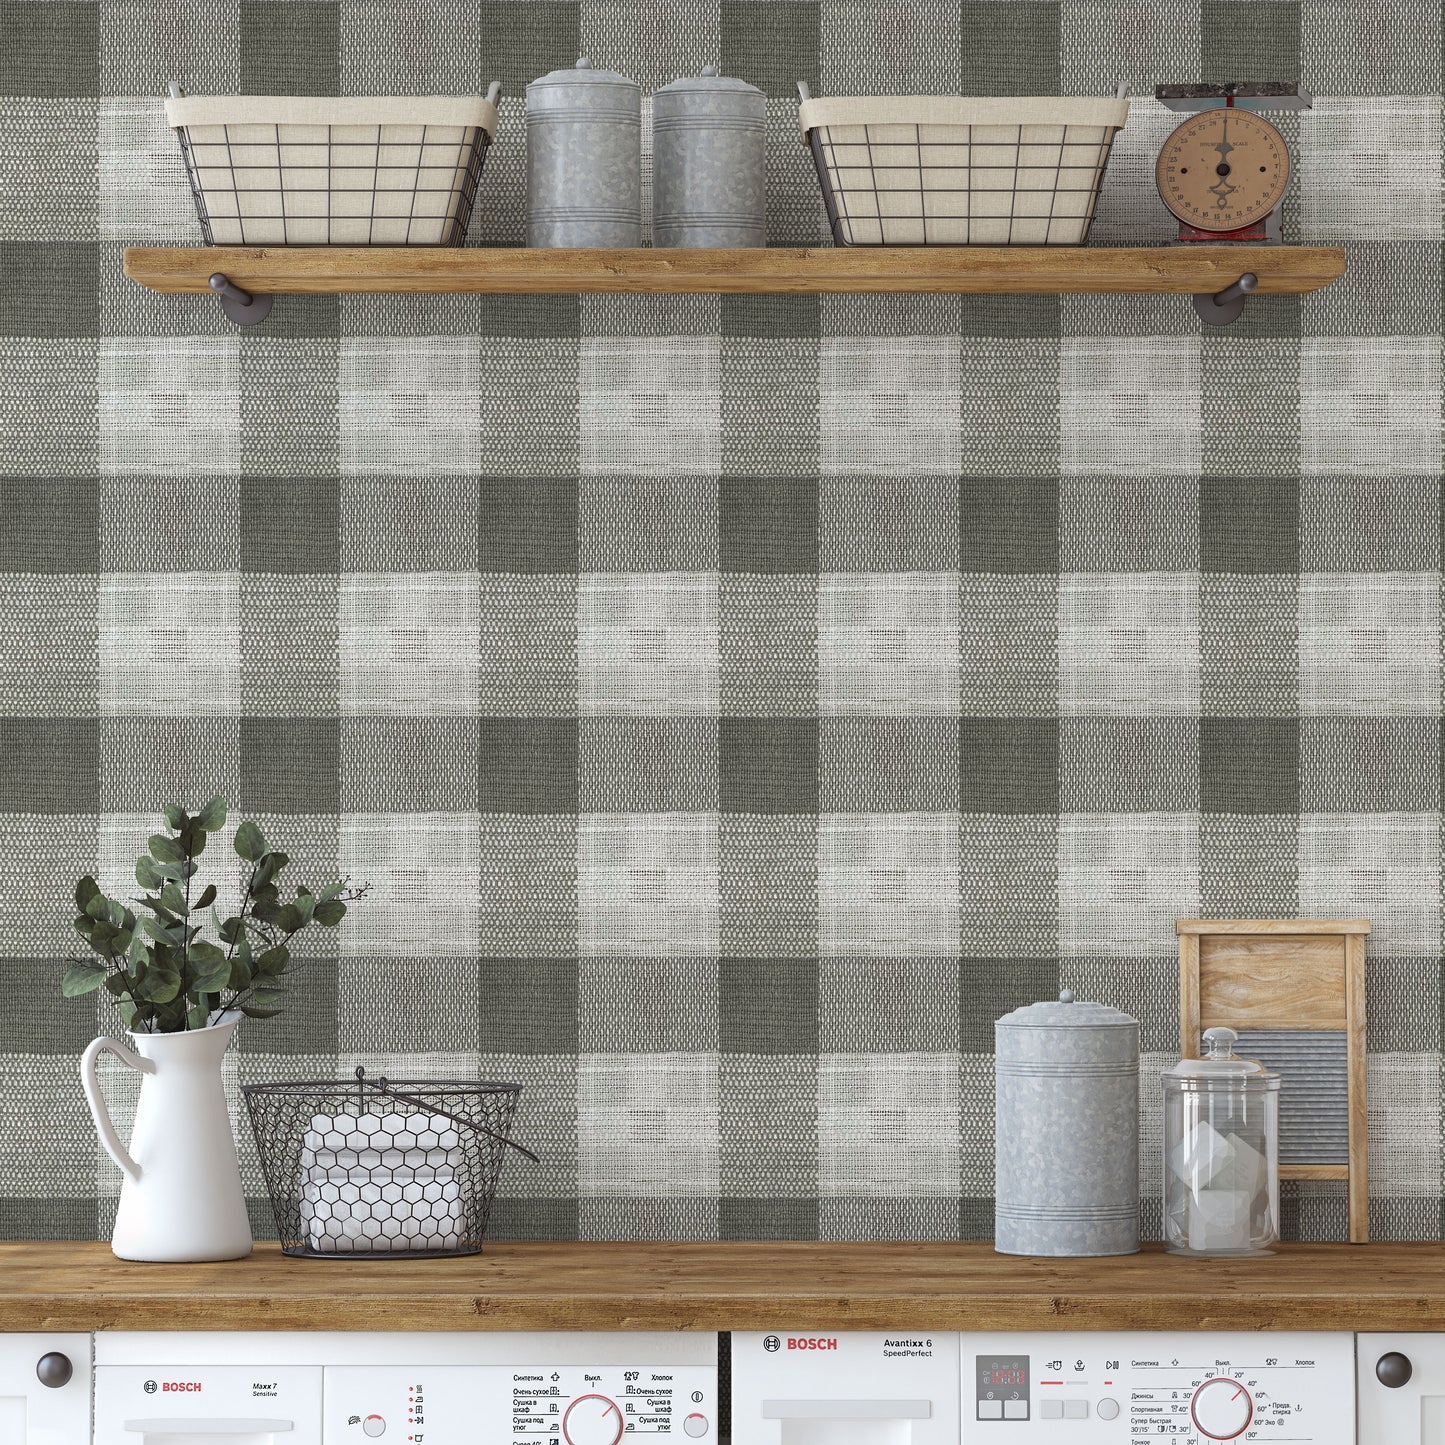 Large print green and cream woven plaid pattern easy to install and remove peel and stick custom wallpaper available in different lengths/sizes locally created and printed in Canada. Removable, washable, durable, commercial grade, customizable and water proof.